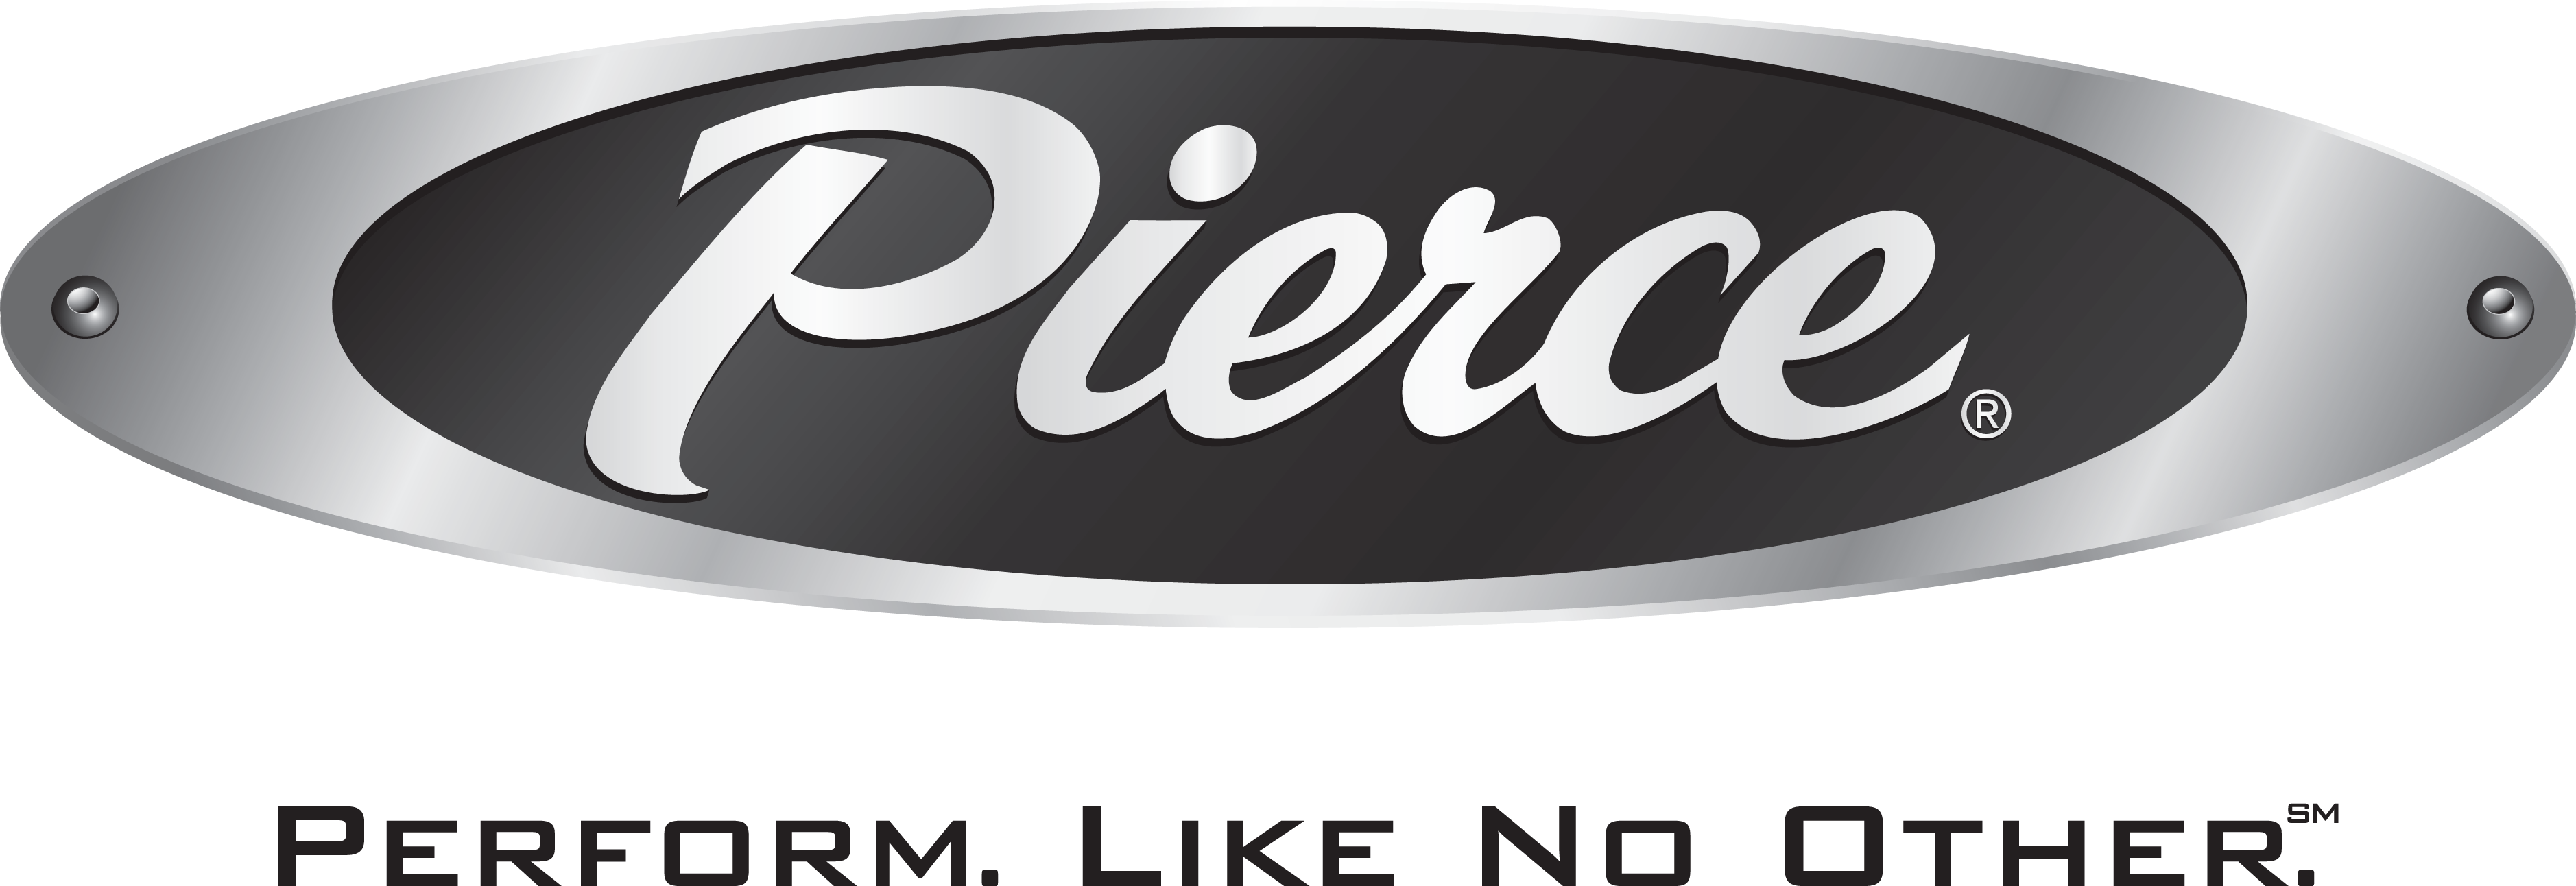 Pierce - Perform Like No Other